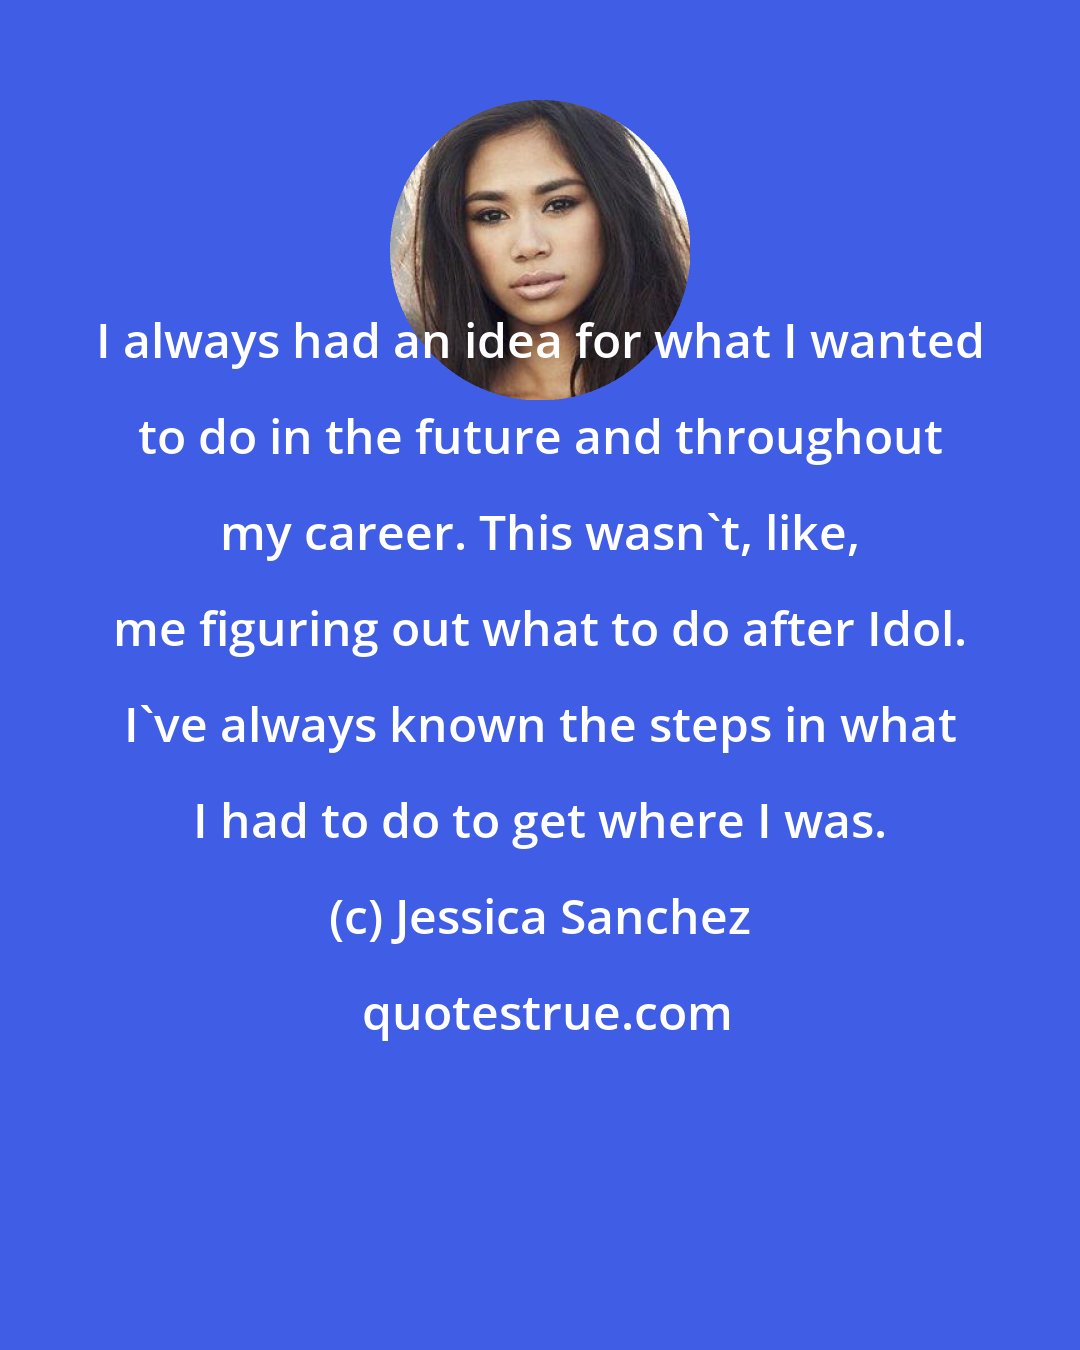 Jessica Sanchez: I always had an idea for what I wanted to do in the future and throughout my career. This wasn't, like, me figuring out what to do after Idol. I've always known the steps in what I had to do to get where I was.